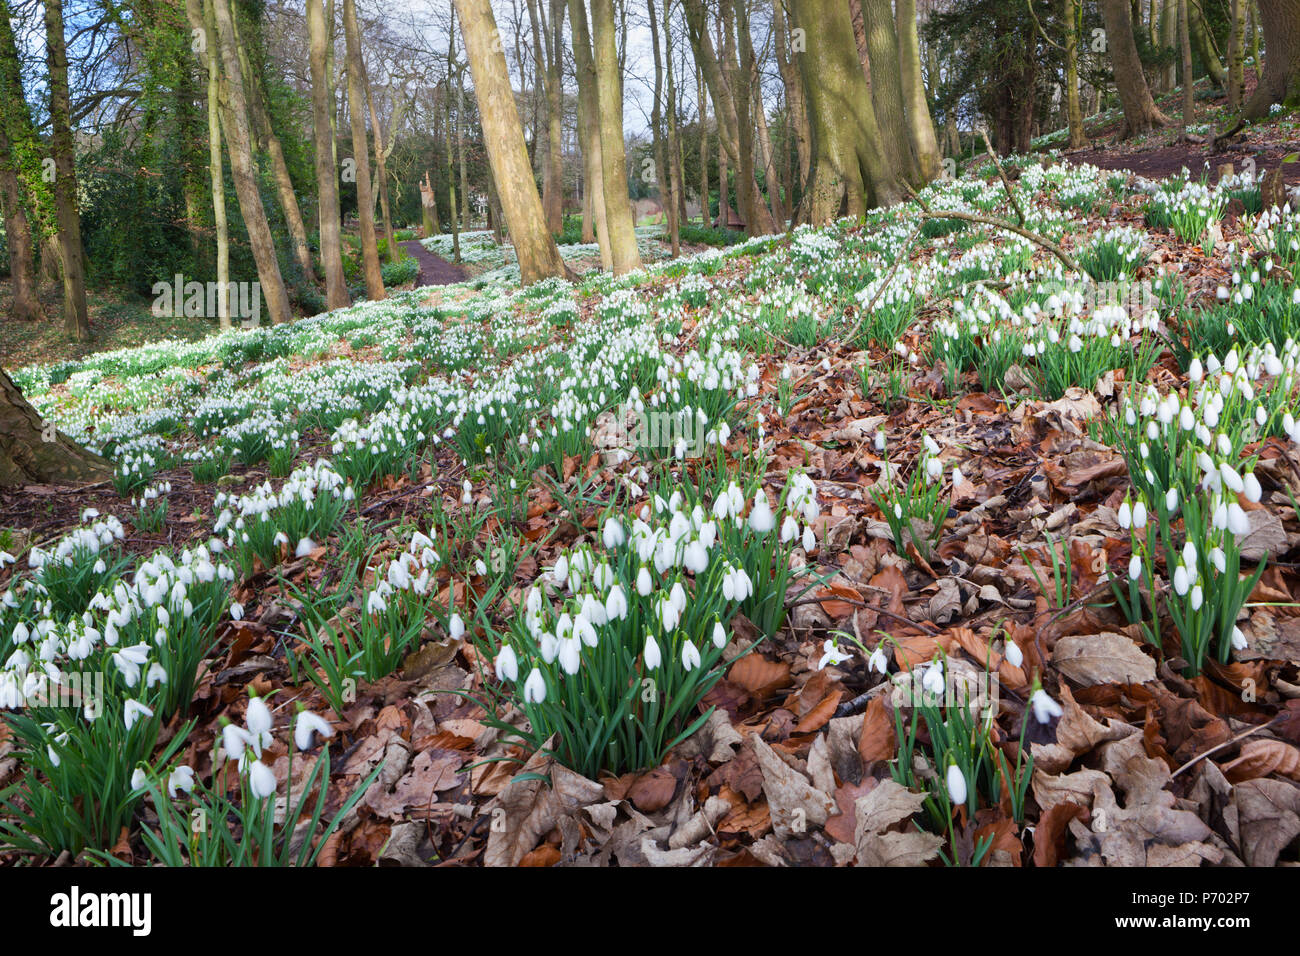 Snowdrops in woodland at the Rococo Garden, Painswick, The Cotswolds, Gloucestershire, England, United Kingdom, Europe Stock Photo